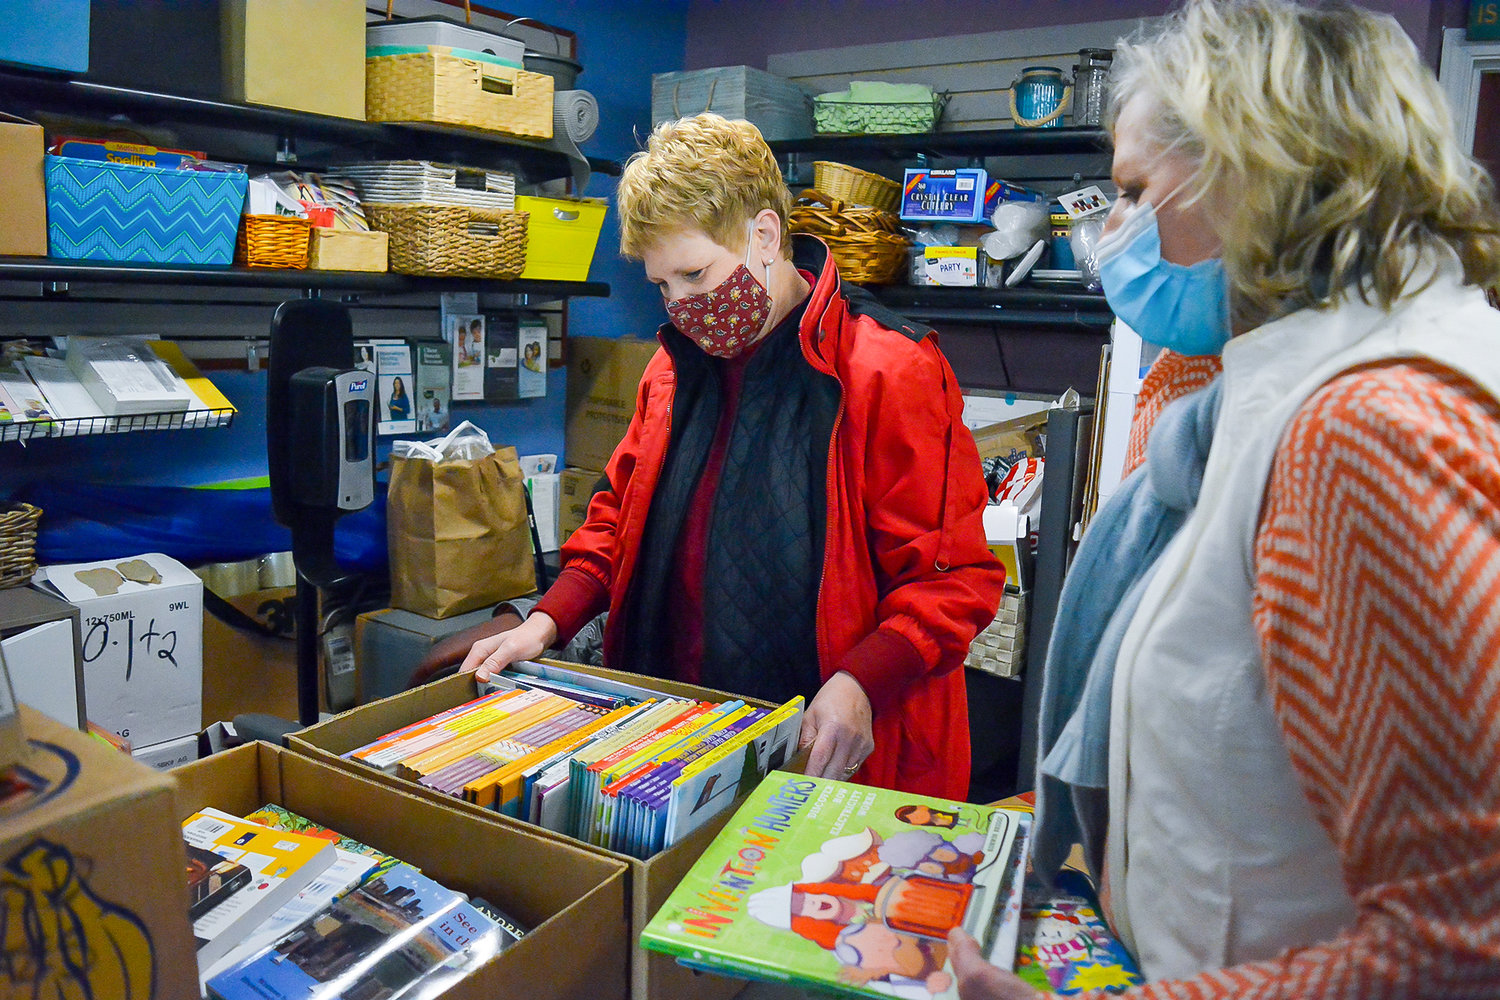 Liz Cerveny, the executive director of North County Community Food Bank, and volunteer Ann Karr look over children’s books, which are included in some of the Christmas baskets the food bank will hand out.